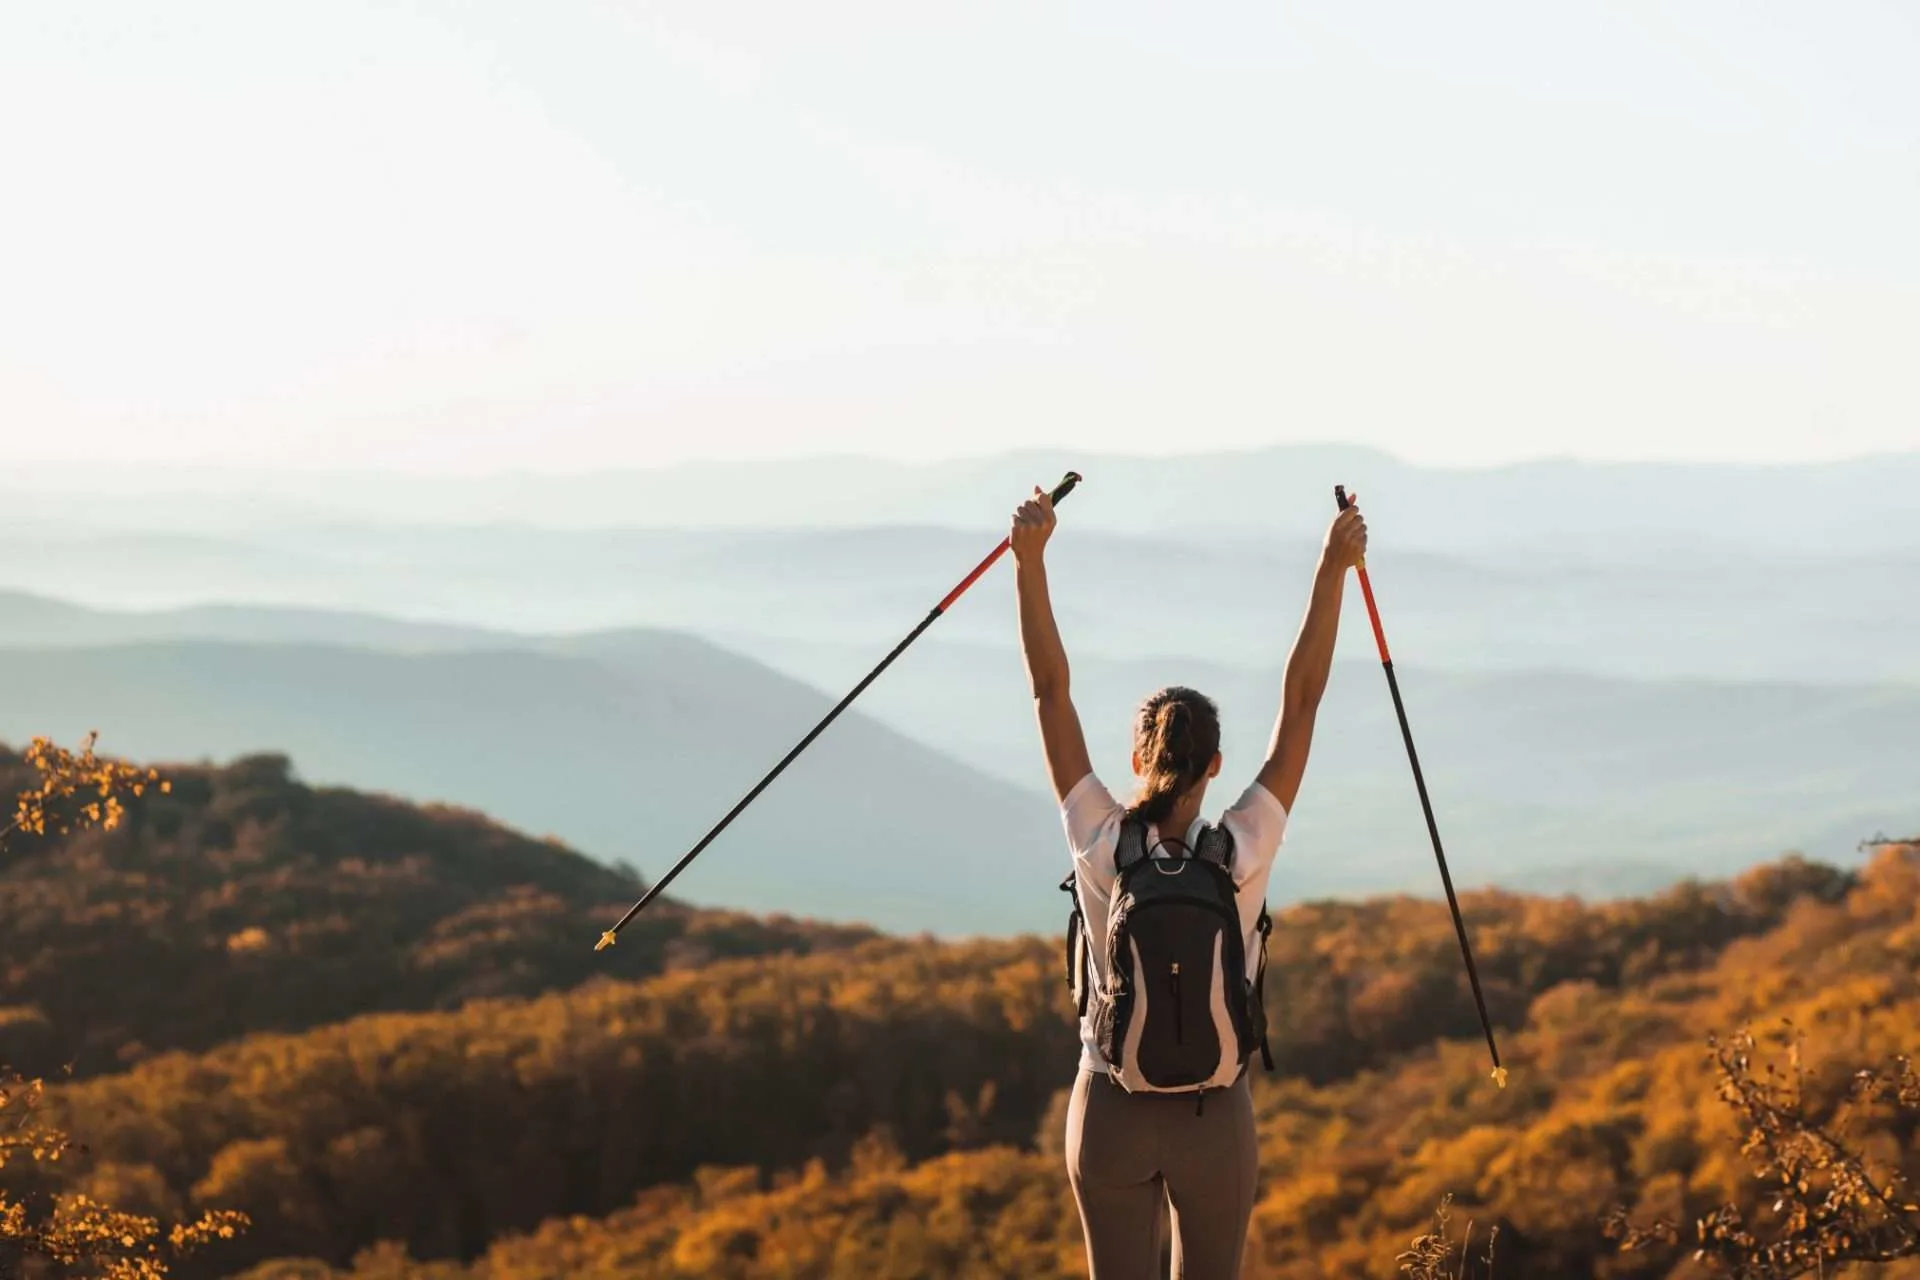 Woman at summit victoriously holding walking sticks for hiking.